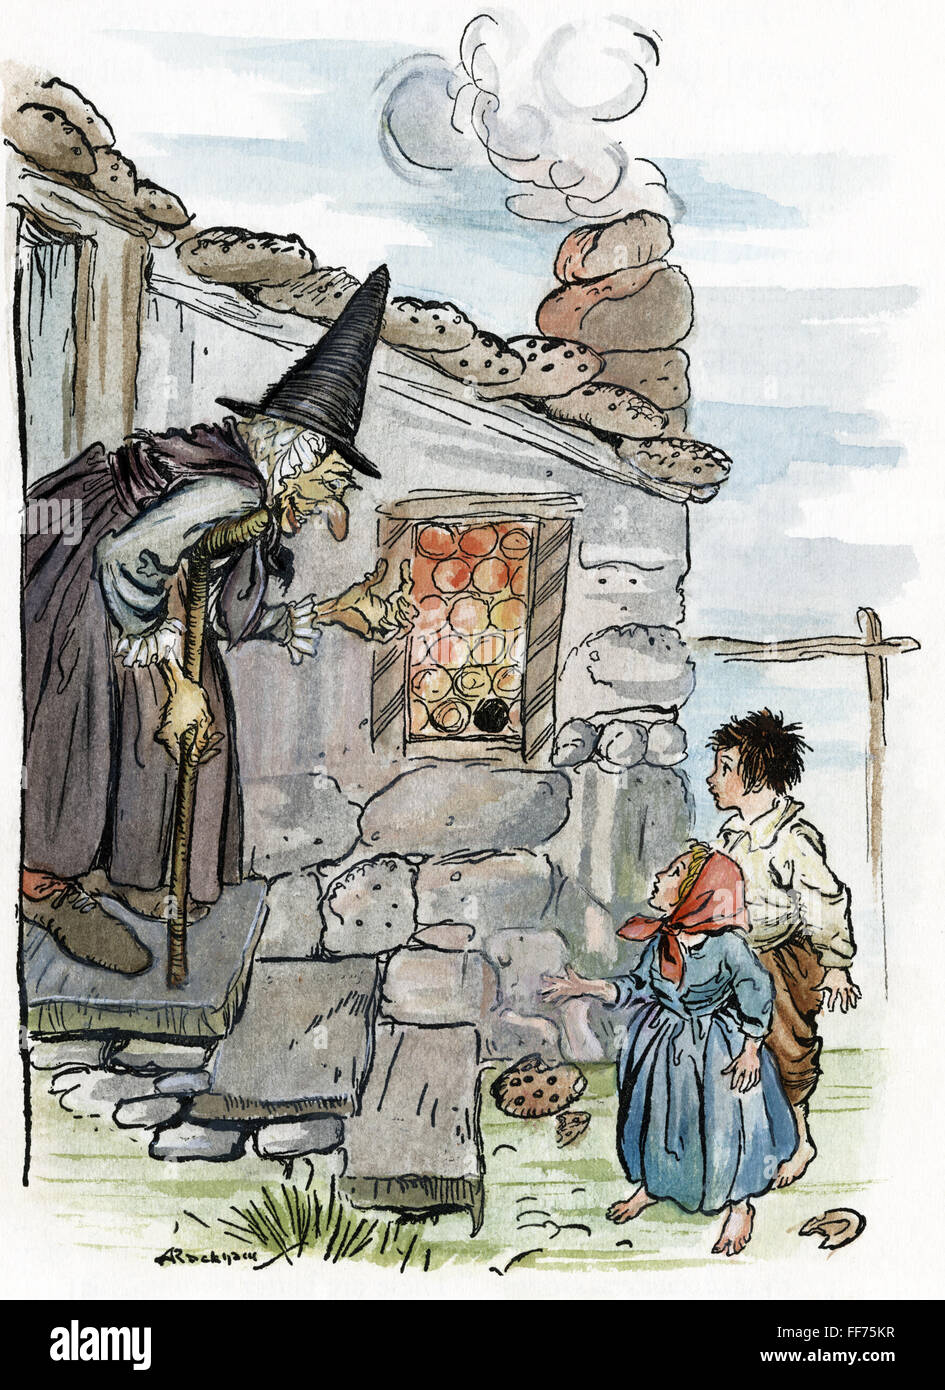 GRIMM: HANSEL AND GRETEL. /nThe wicked witch invites Hansel and Gretel into her house. Drawing by Arthur Rackham for the fairy tale by Brothers Grimm, c1909. Stock Photo